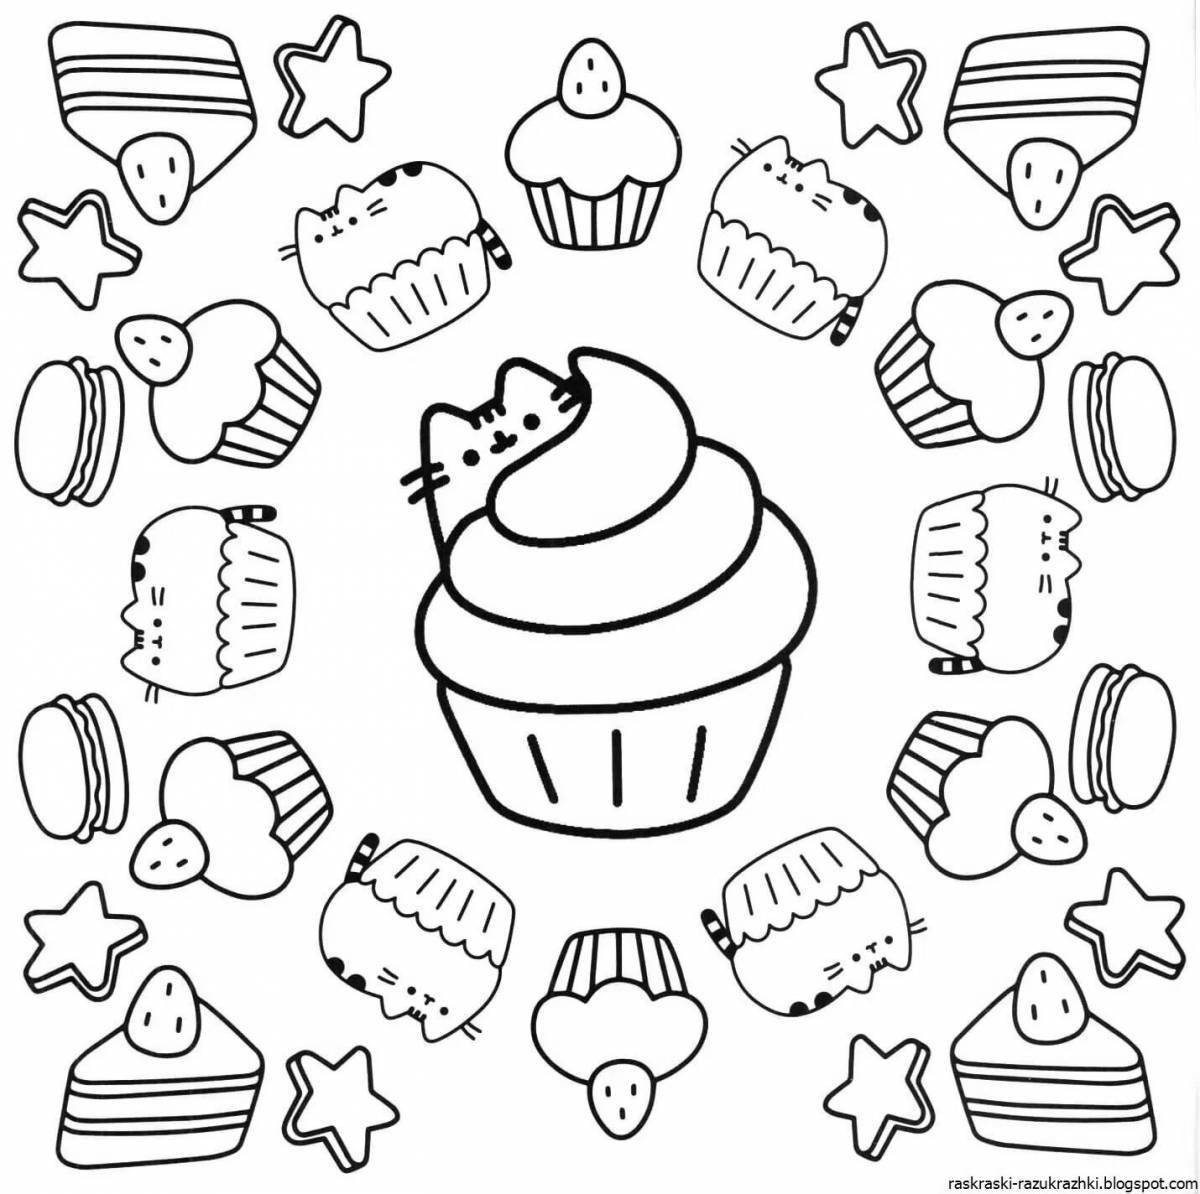 Lovely printable coloring book stickers